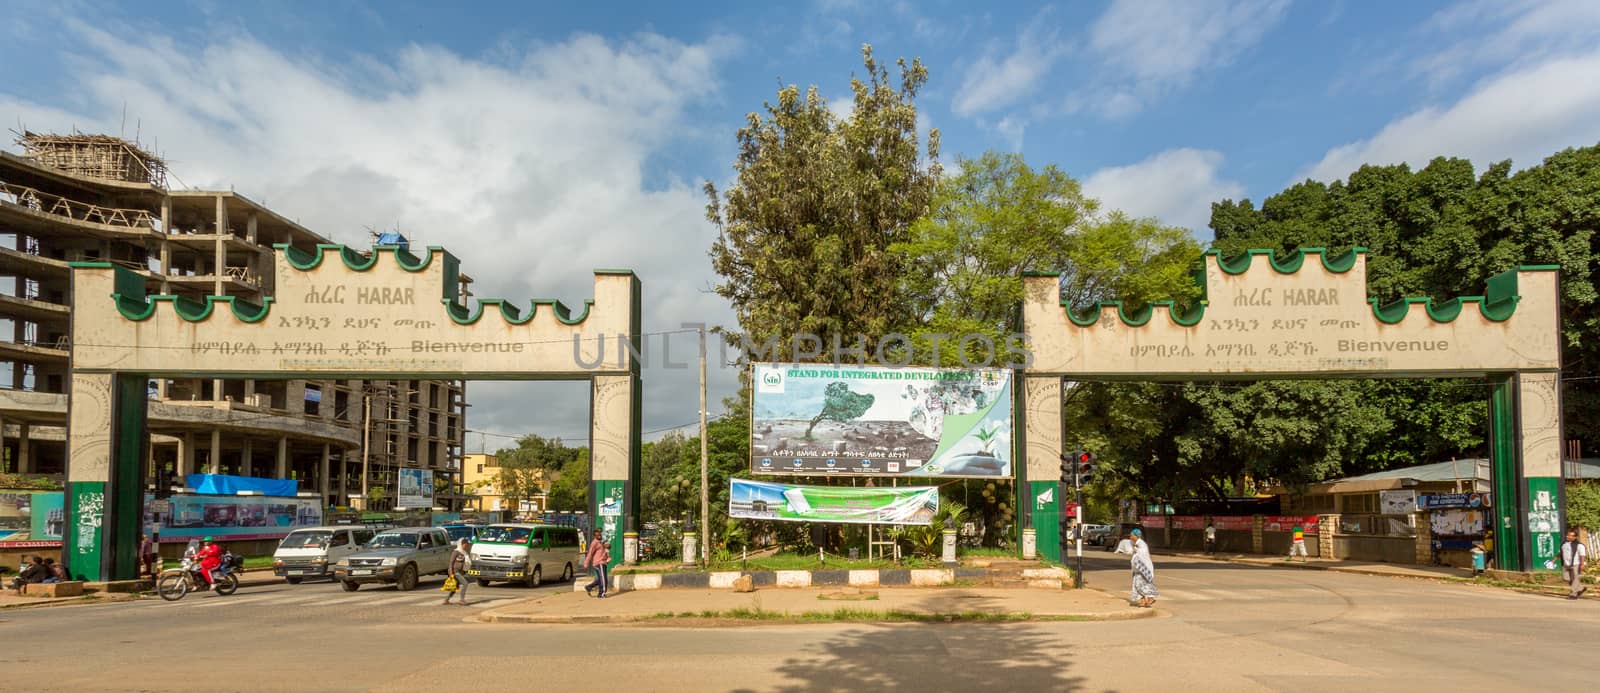 HARAR, ETHIOPIA - JULY 26,2014 - Two Gates with welcoming messages are placed at the border of the city of Harar.